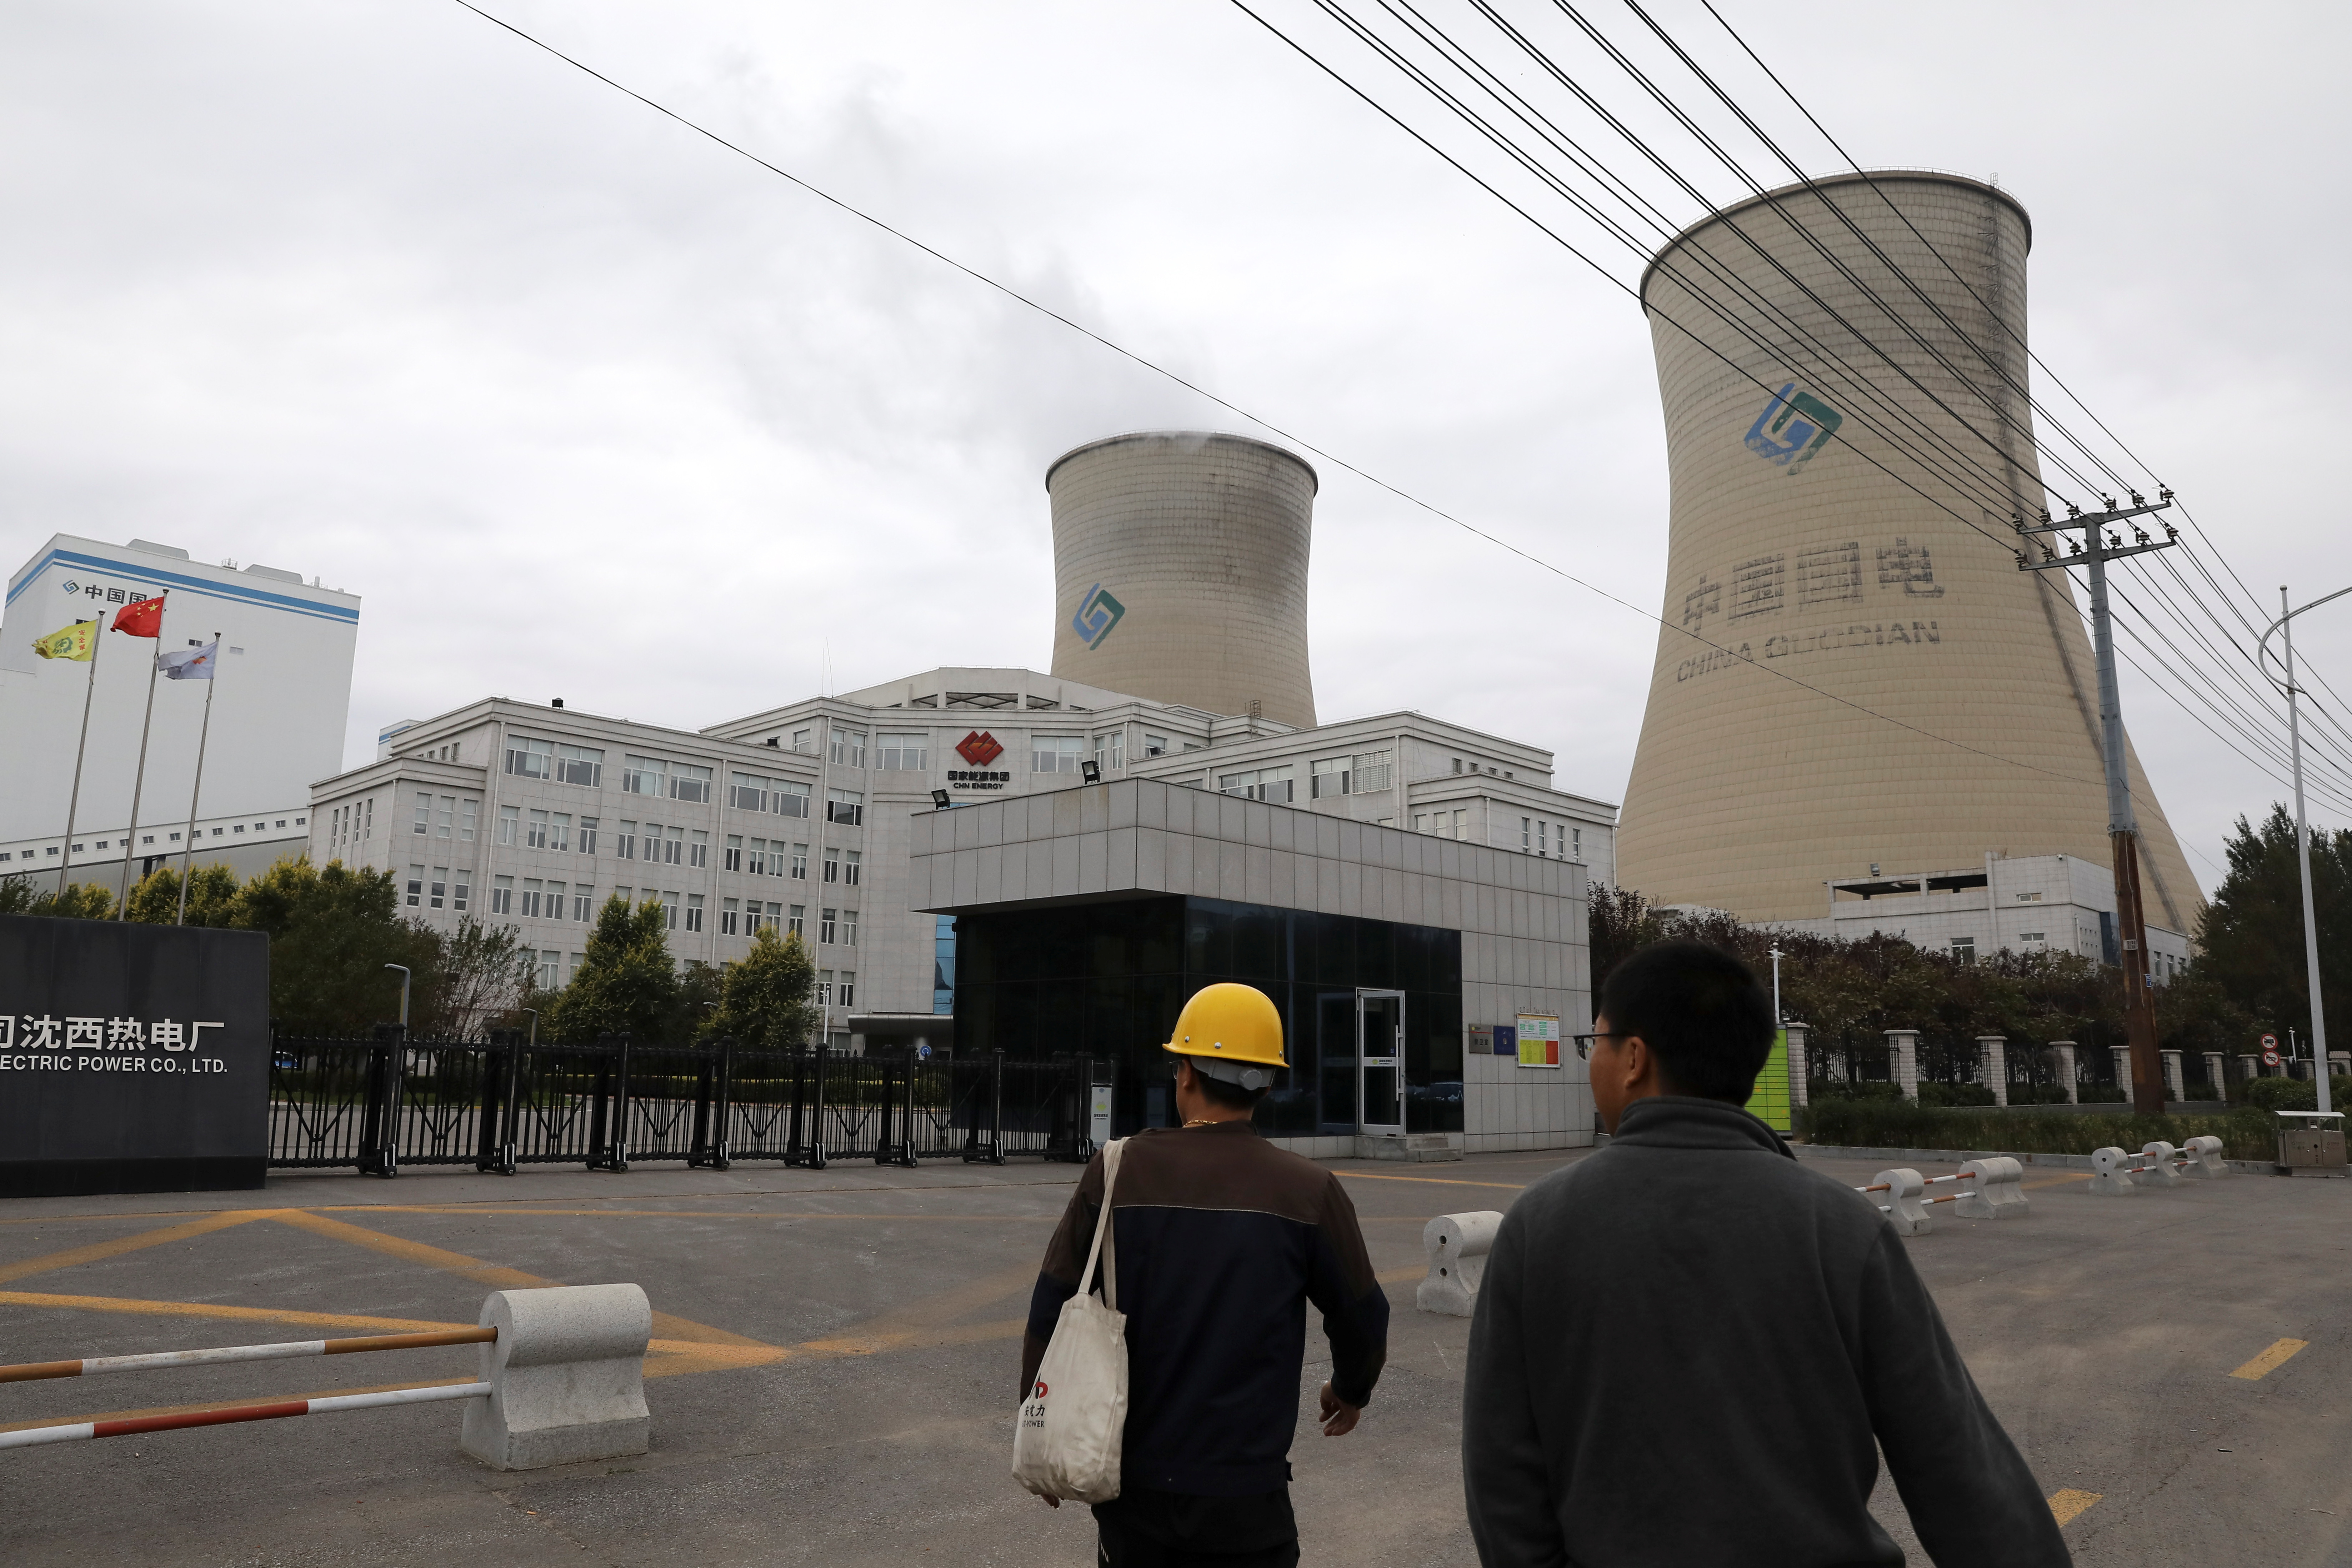 People walk past a coal-fired power plant in Shenyang